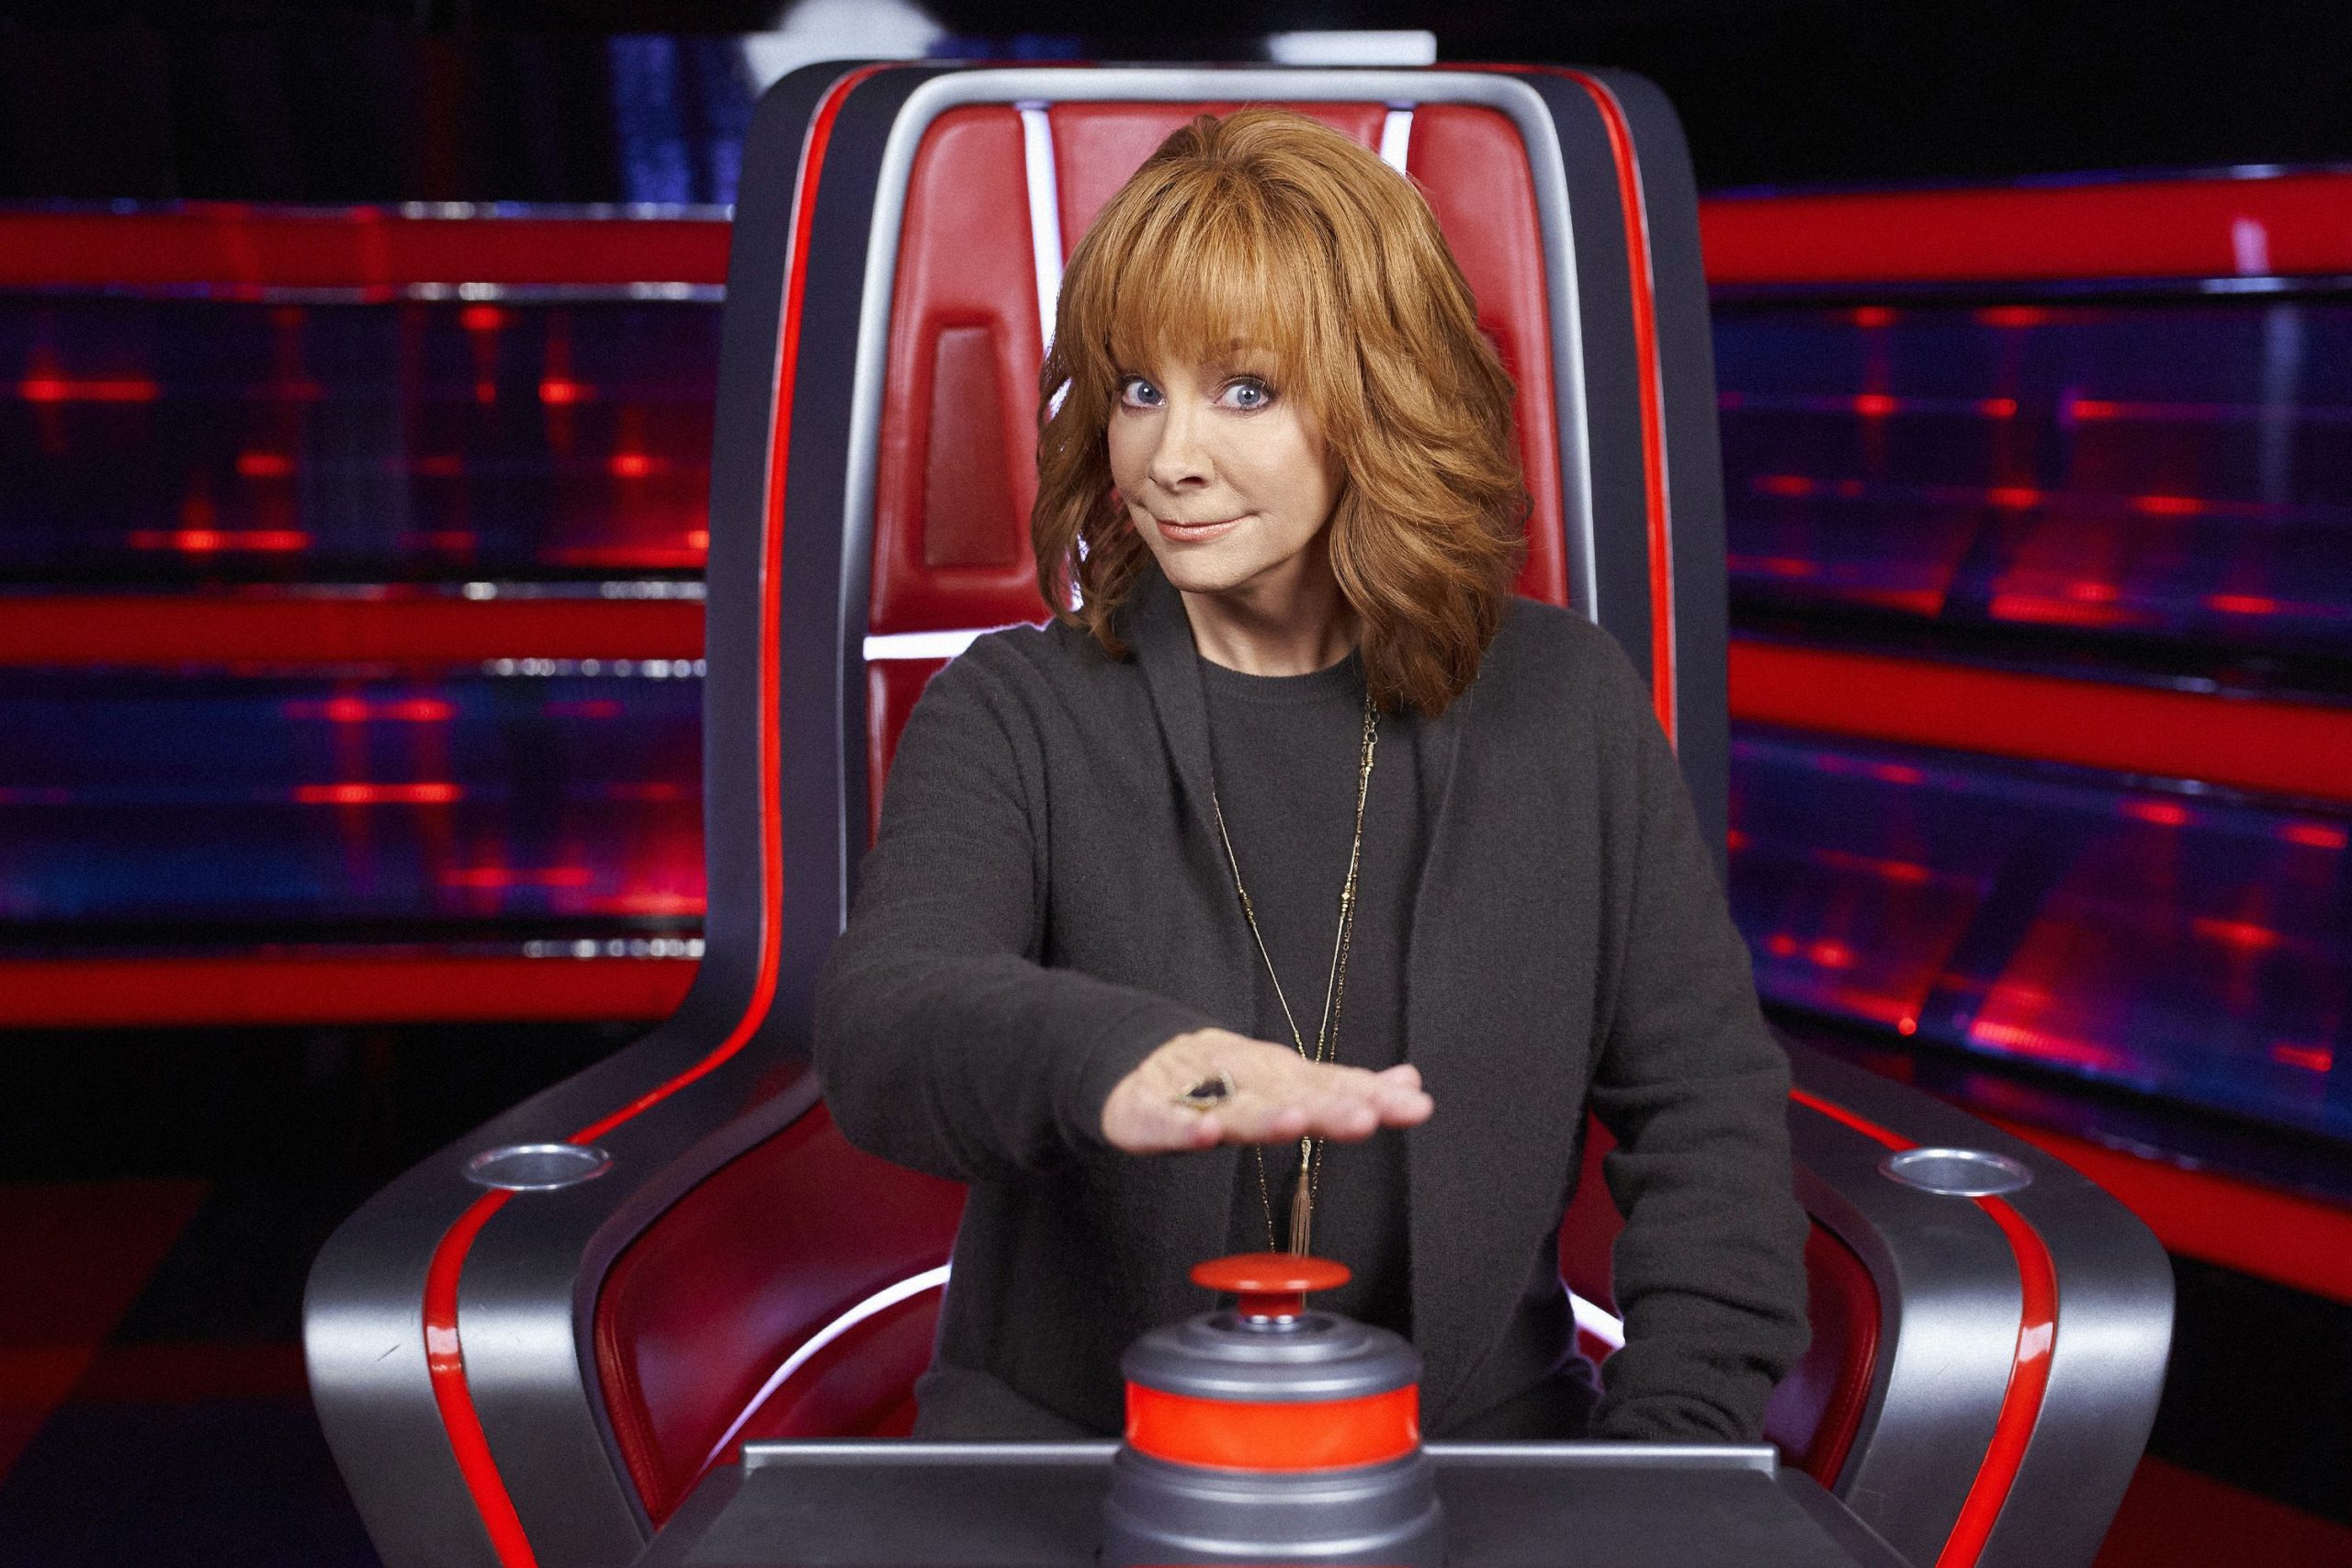 REBA MCENTIRE SET TO JOIN NBC’S ‘THE VOICE’ AS COACH FOR SEASON 24